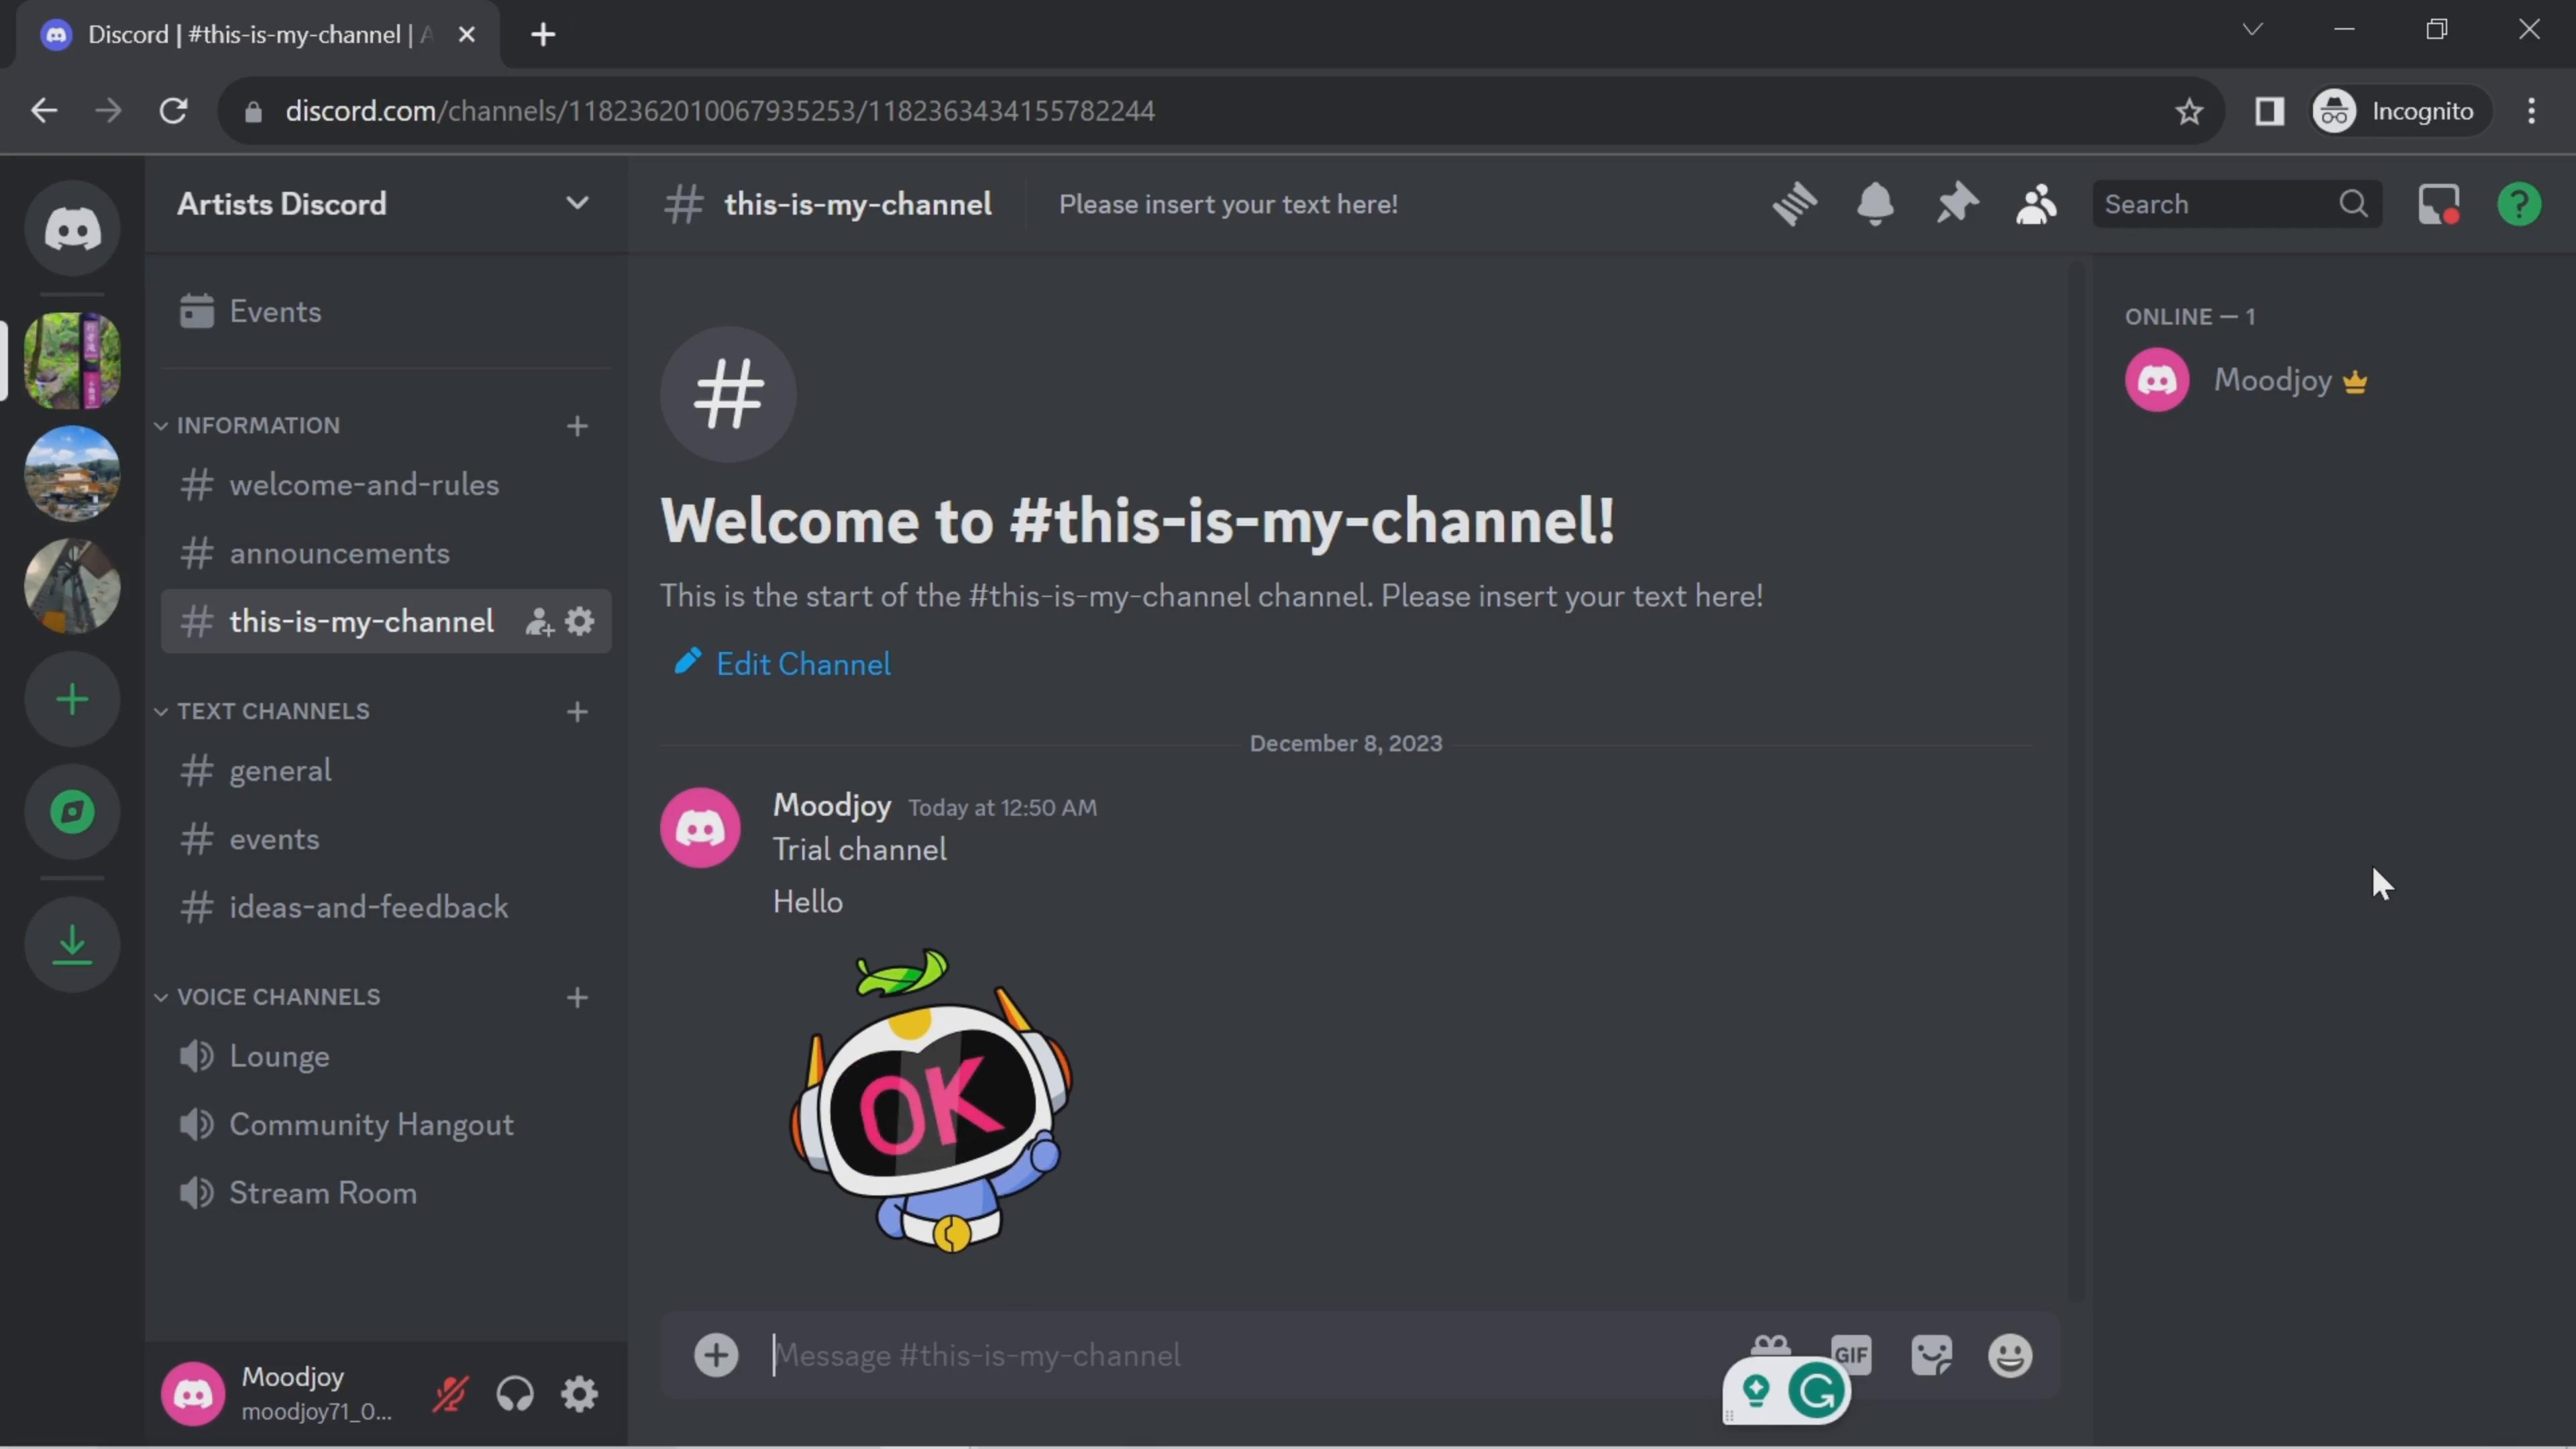 Screenshot of Inviting people on Discord